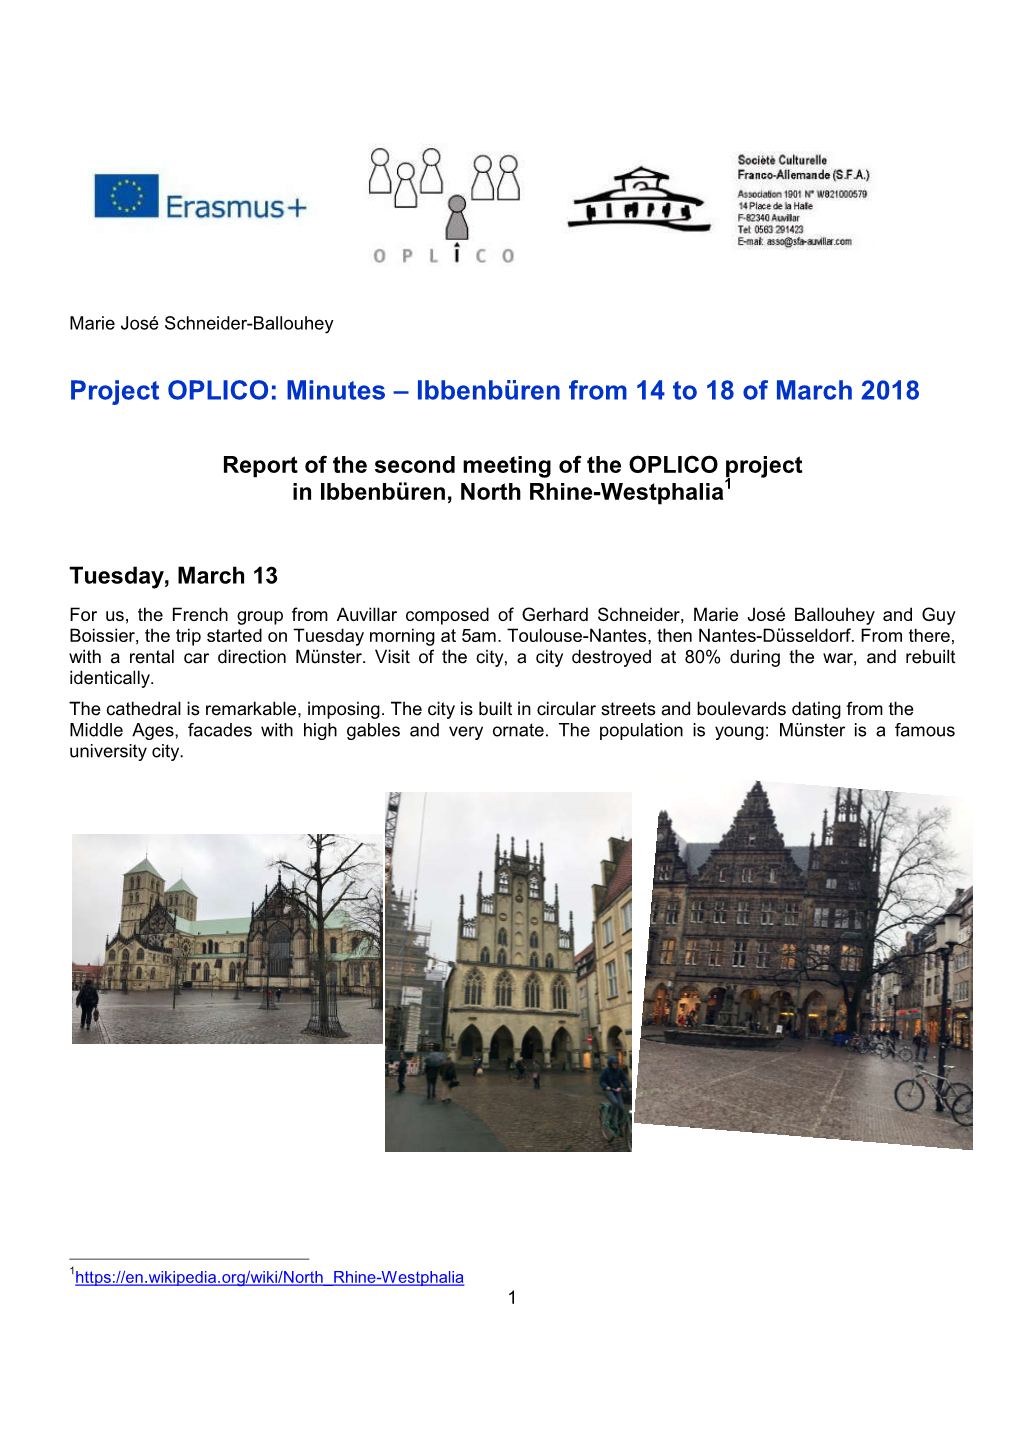 Project OPLICO: Minutes – Ibbenbüren from 14 to 18 of March 2018